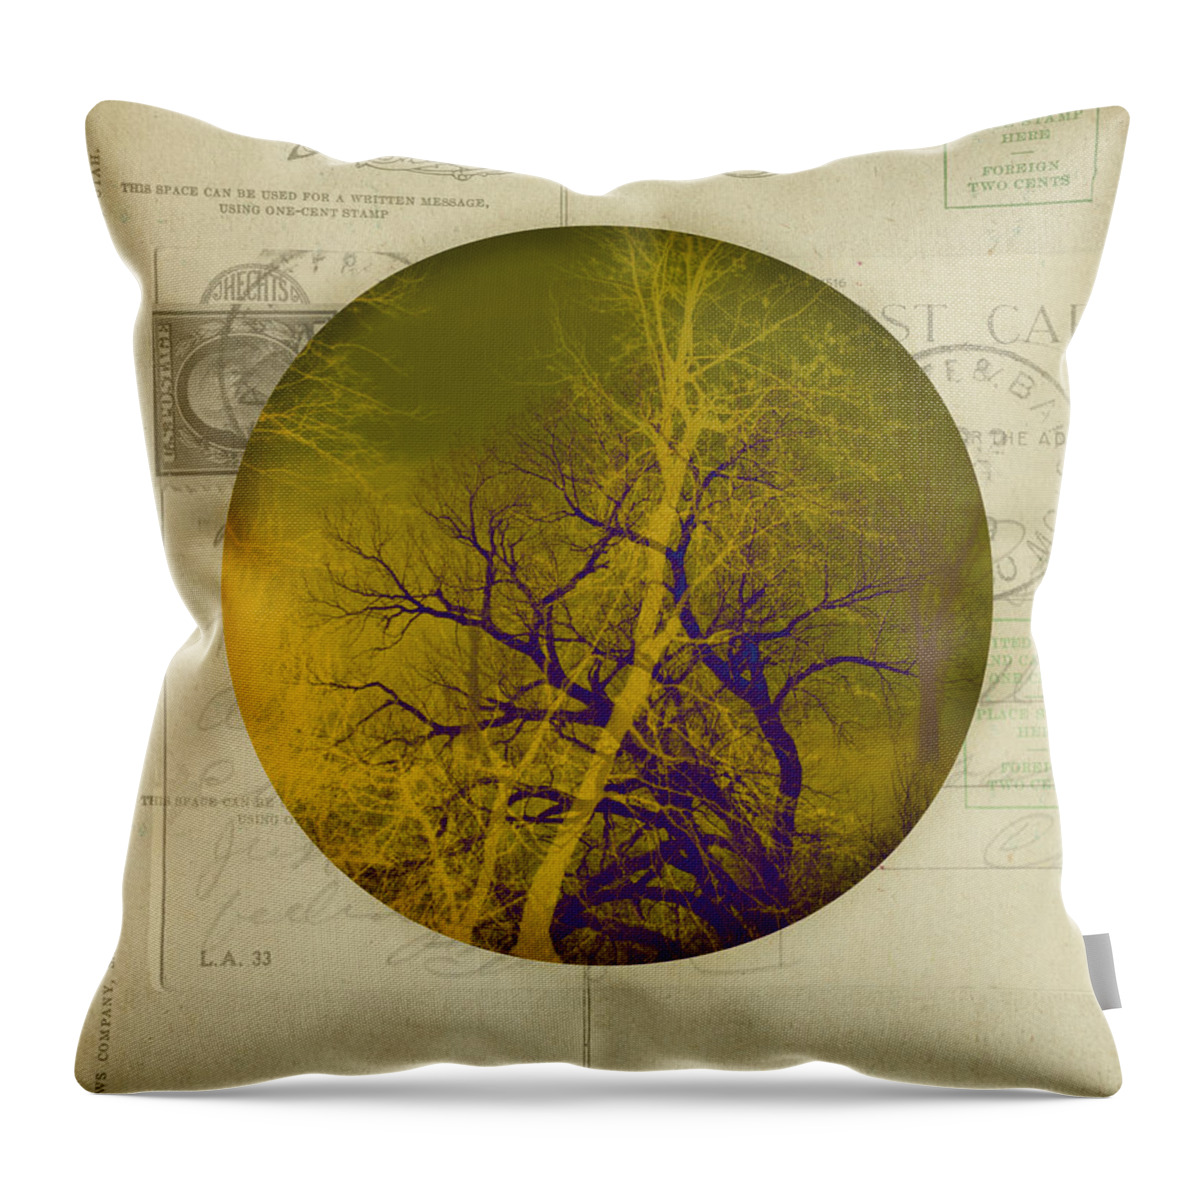 Mixed Media Throw Pillow featuring the mixed media The Postcard by Ann Powell